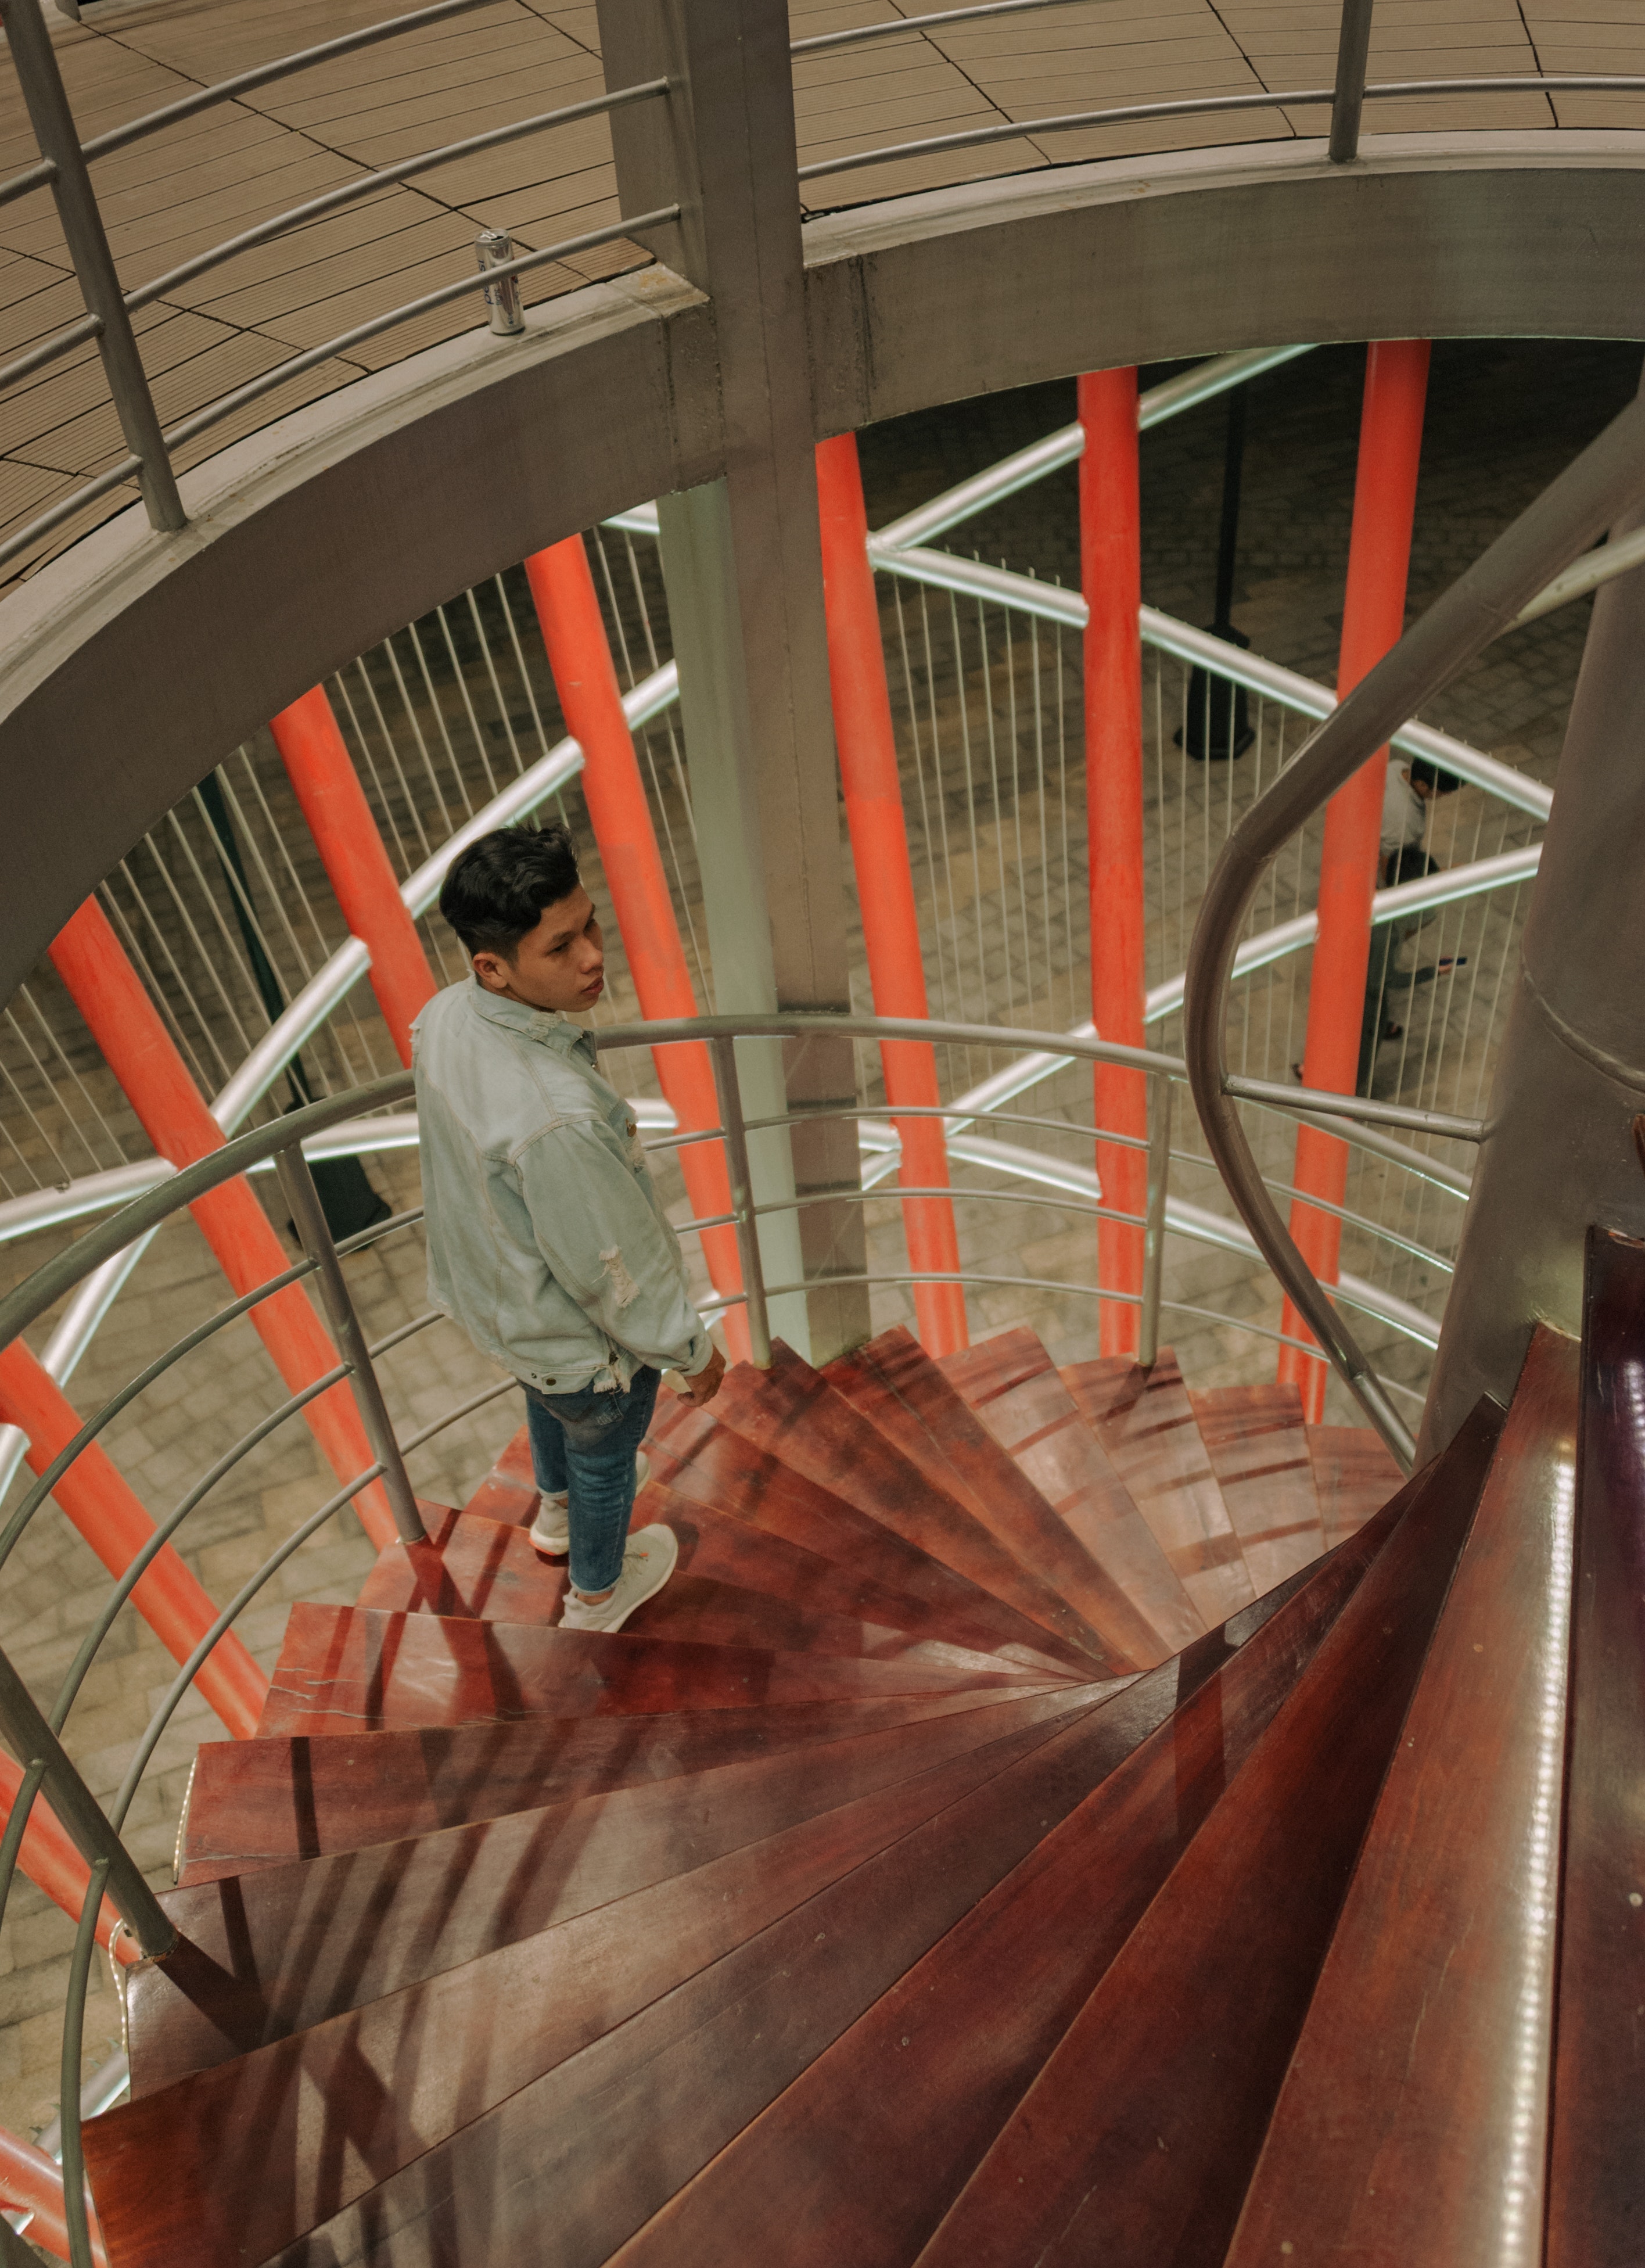 Man wearing gray long-sleeved top at the staircase photo